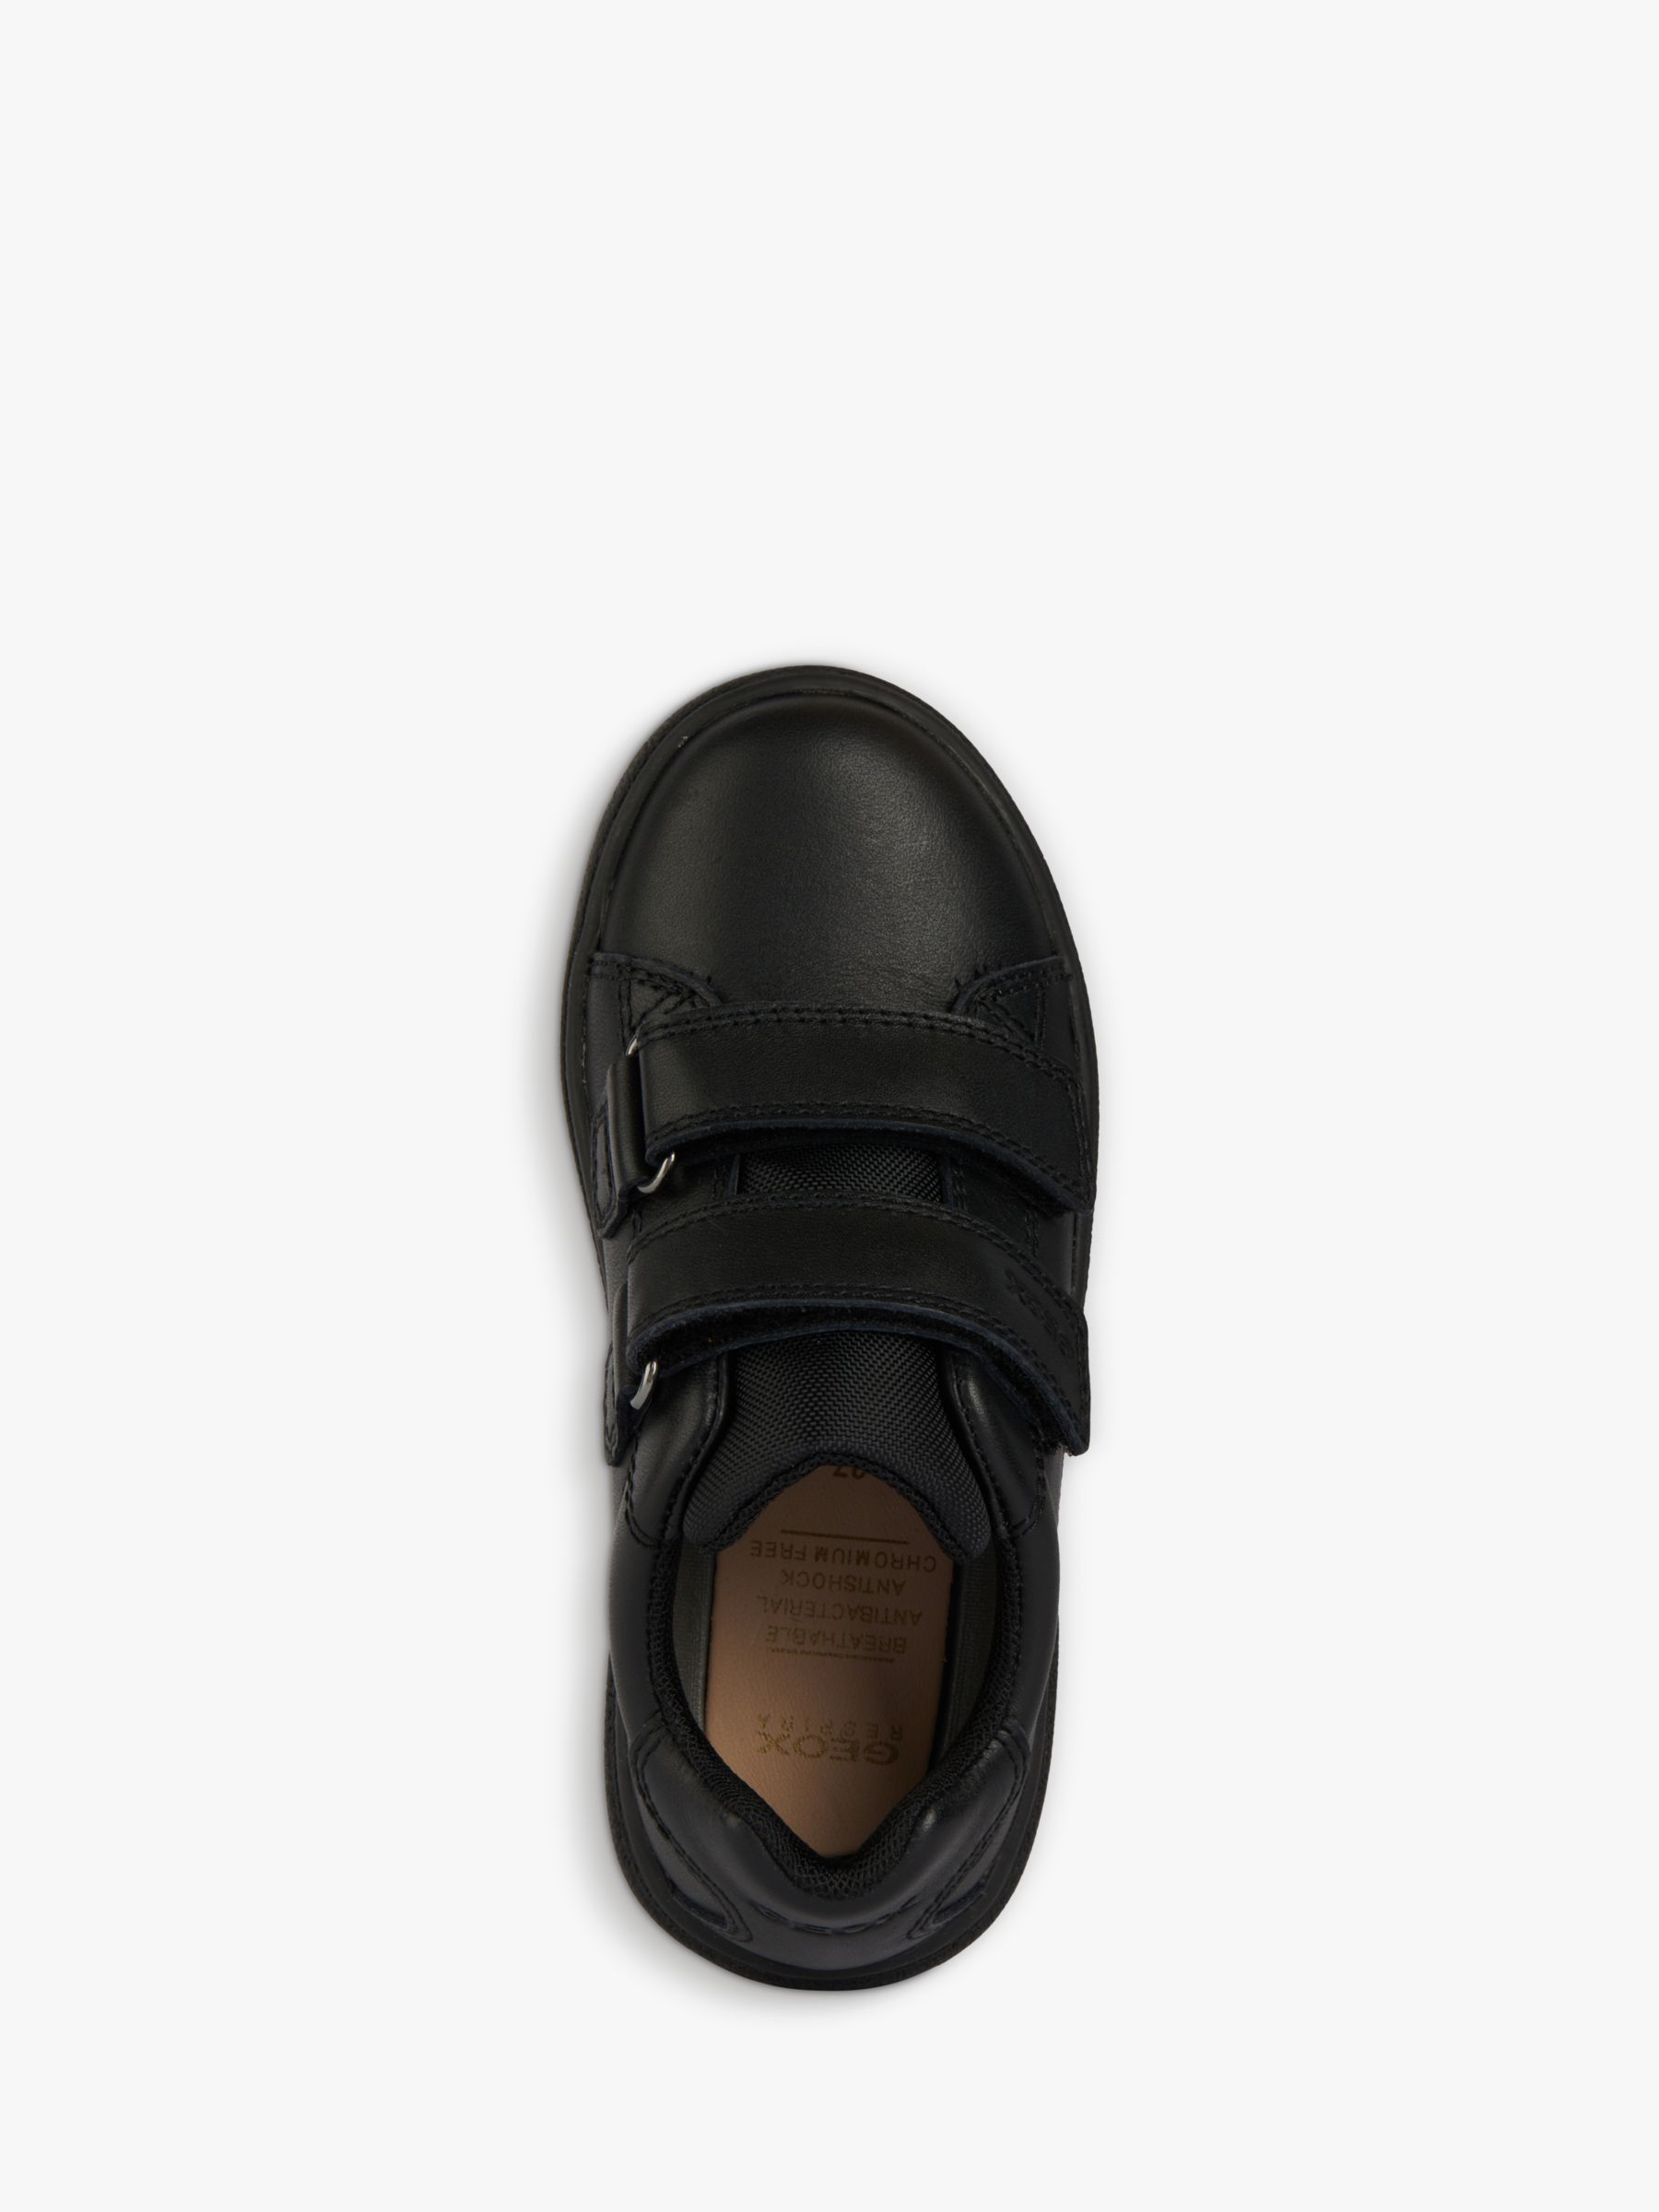 Buy Geox Kids' Theleven Low Cut School Shoes Online at johnlewis.com